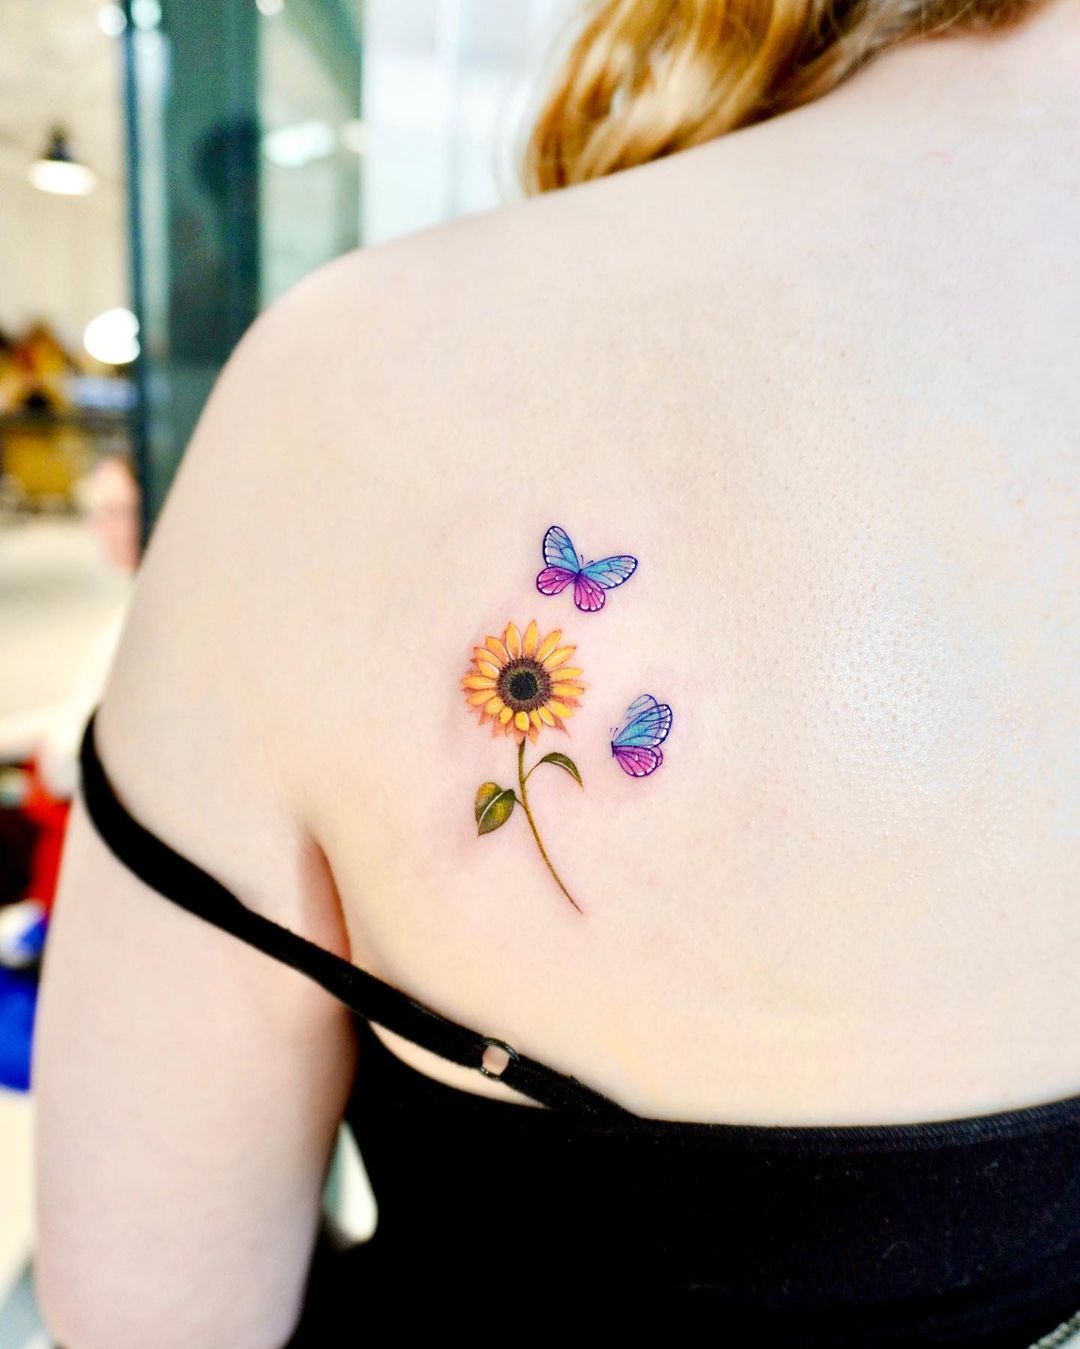 Sunflower with butterfly tattoo by kico.tattoo